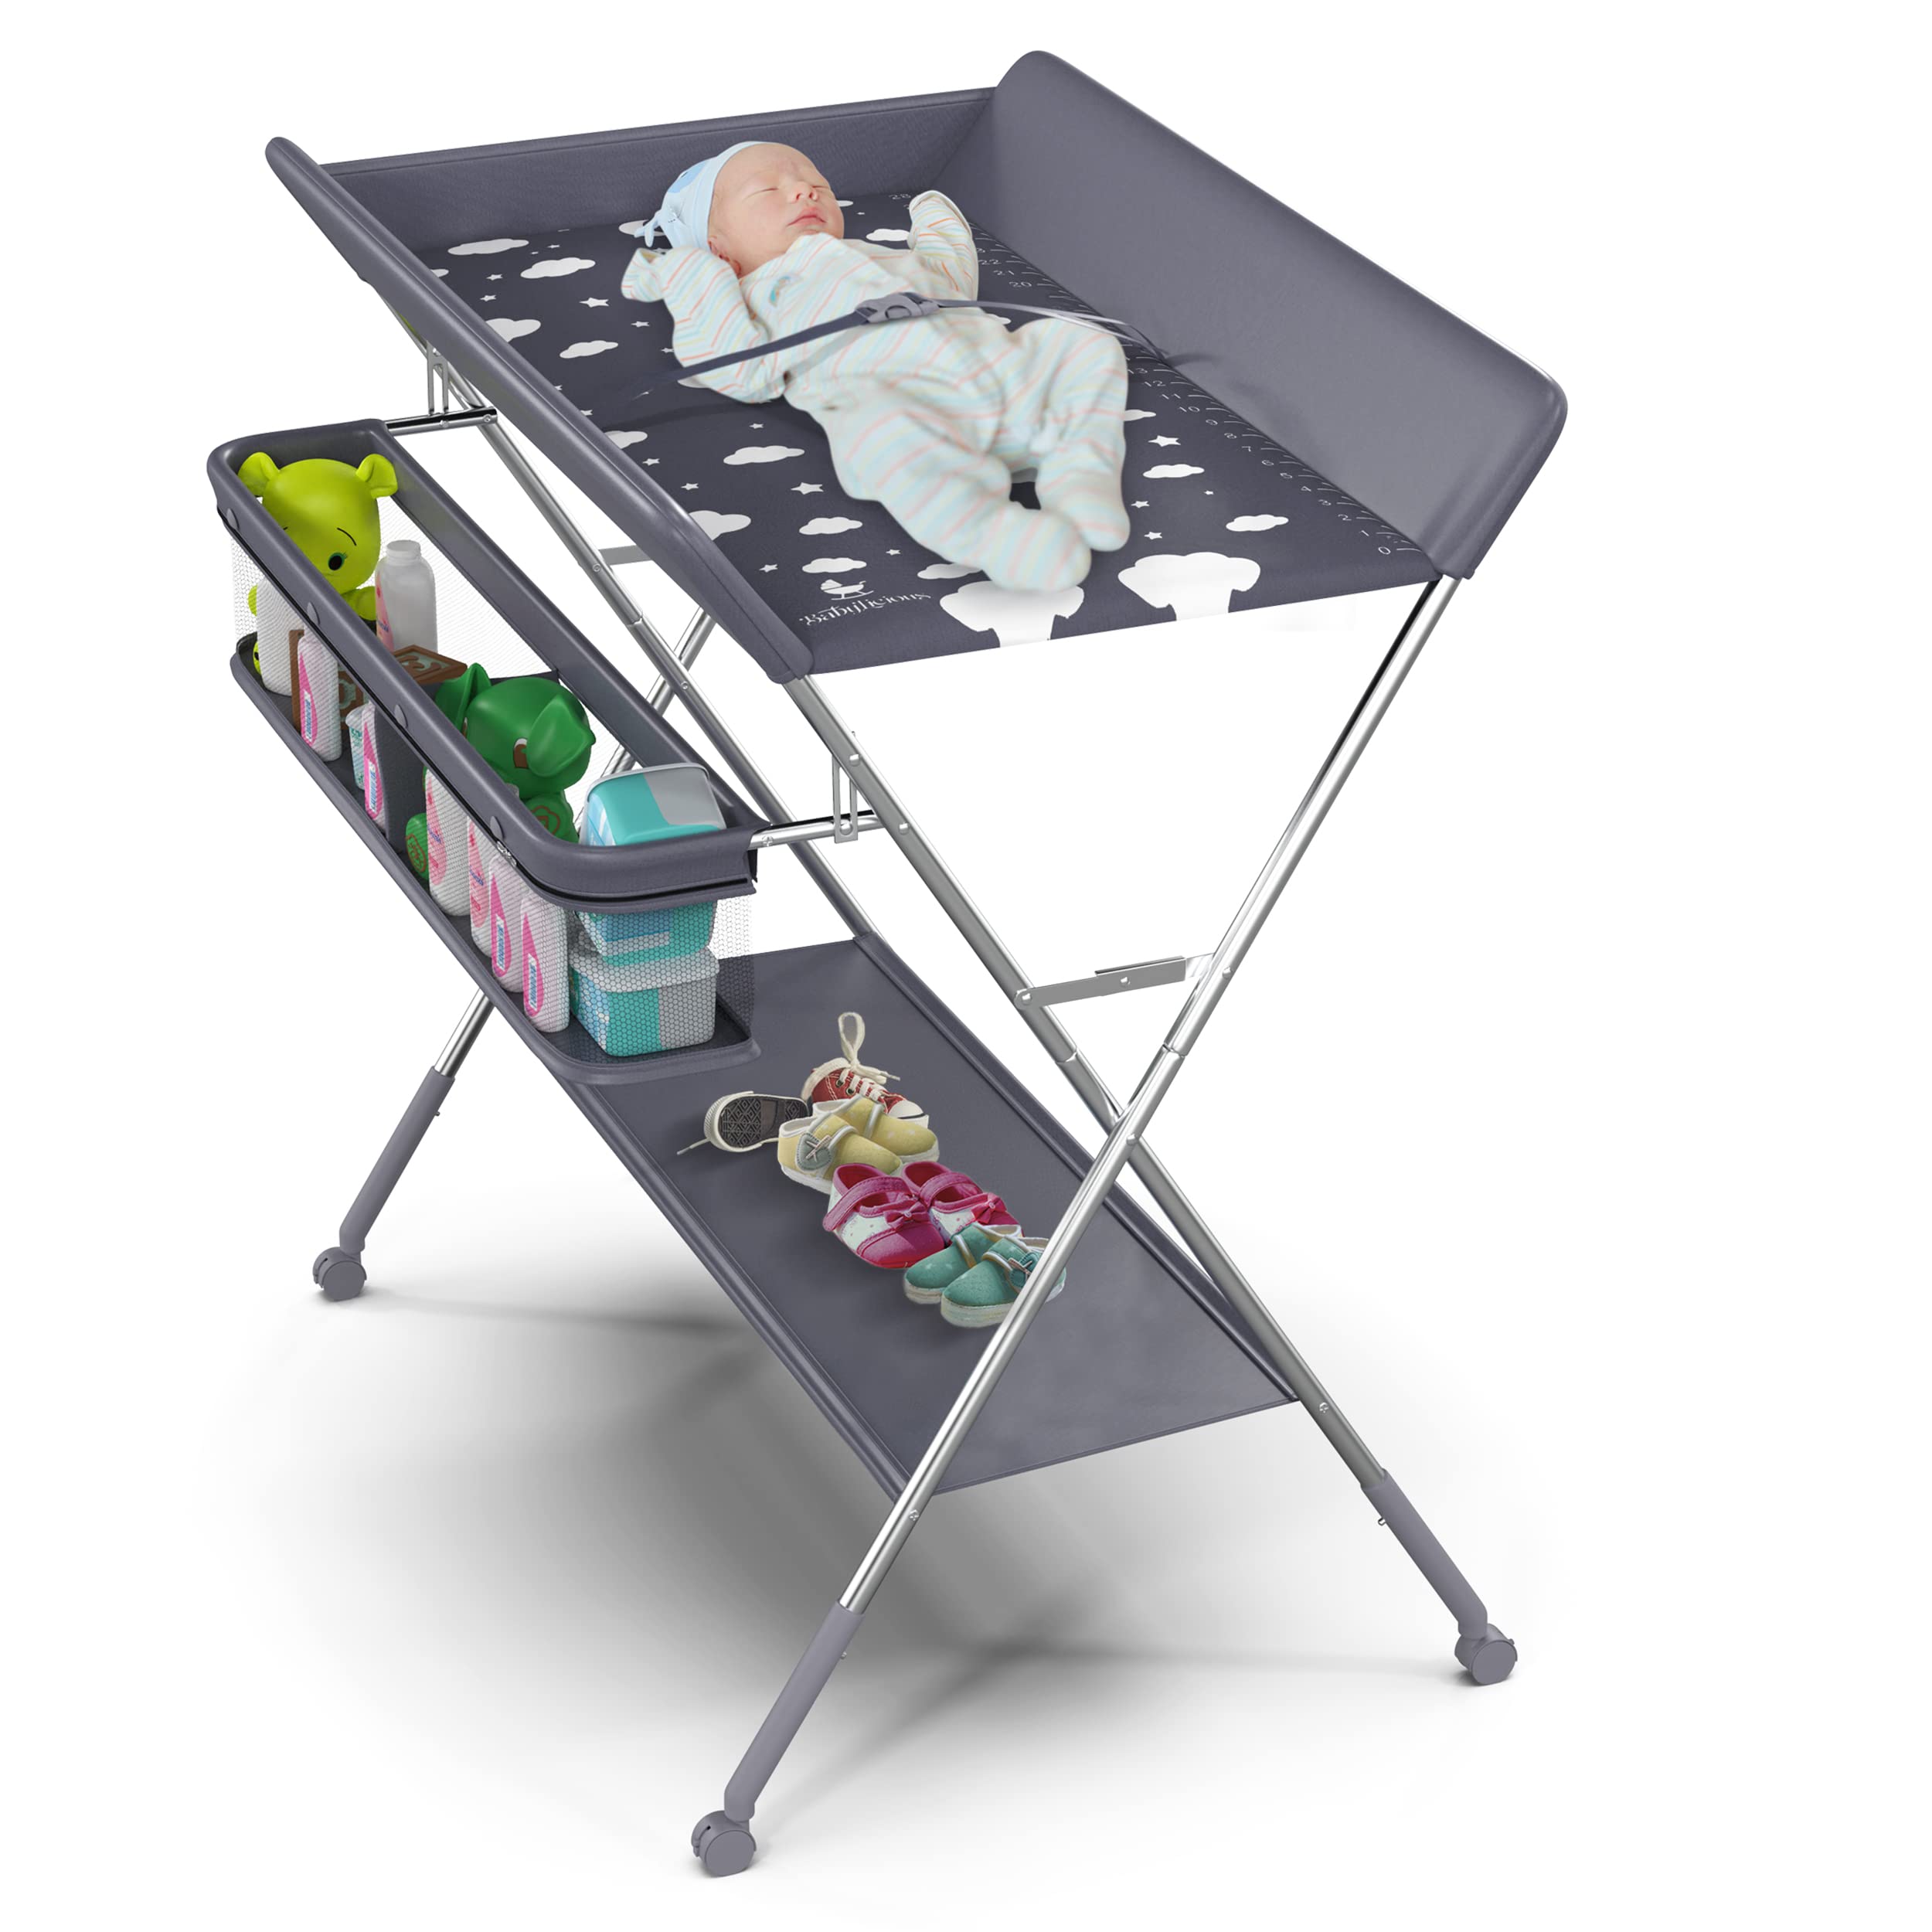 Babylicious Baby Portable Changing Table - Foldable Changing Table with Wheels - Portable Diaper Changing Station - Adjustable H